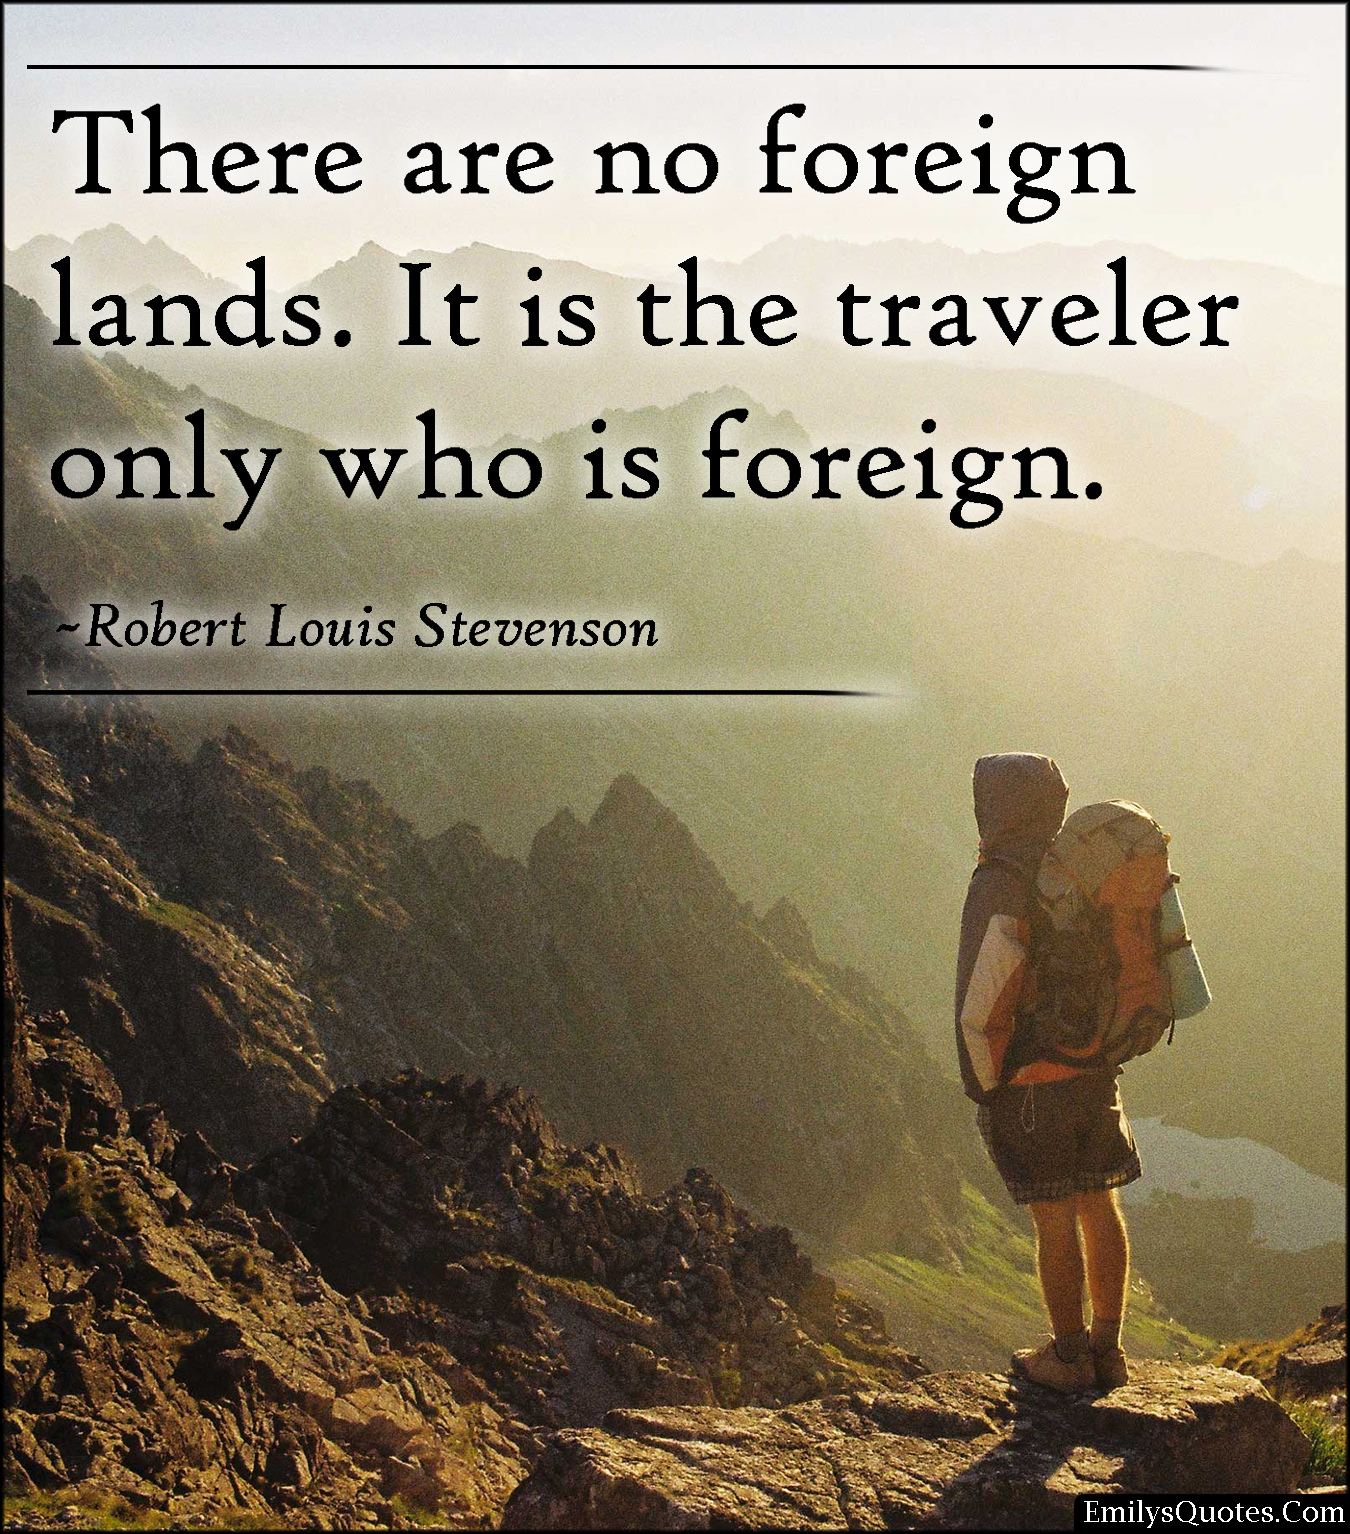 There are no foreign lands. It is the traveler only who is foreign